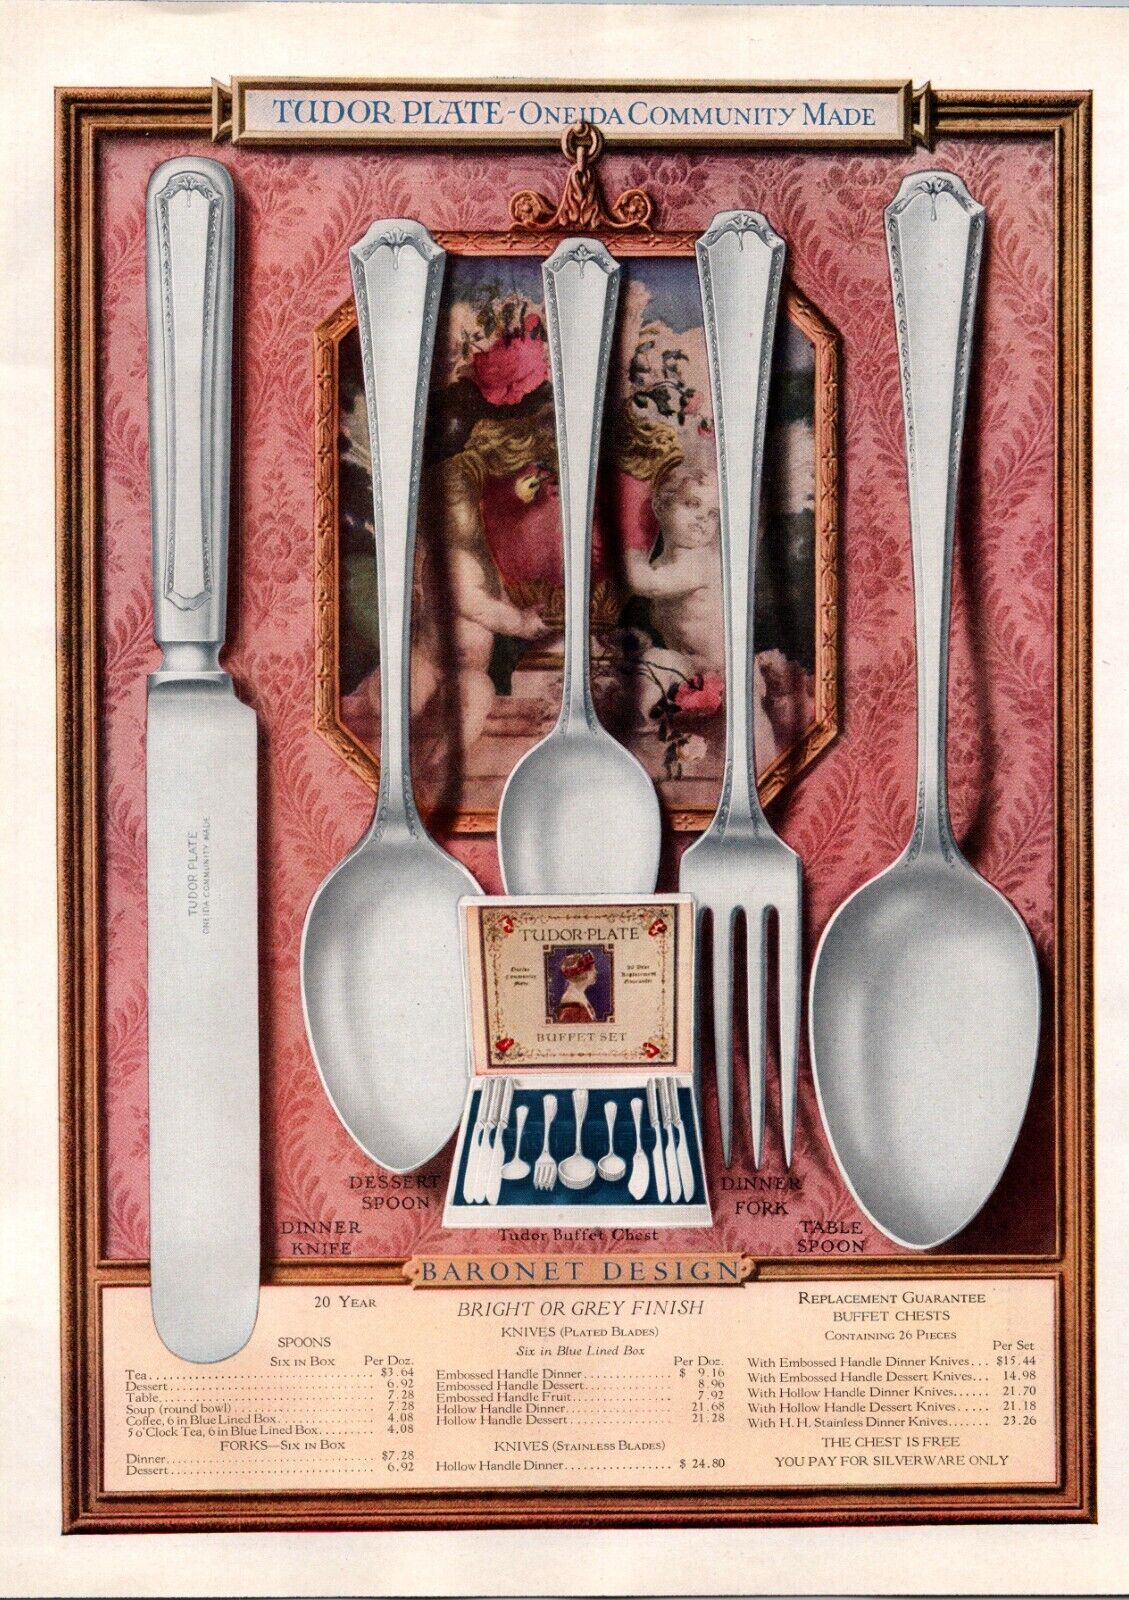 Commnity Plate Baronet Design Flatware 1924 Illustrated Catalog Page